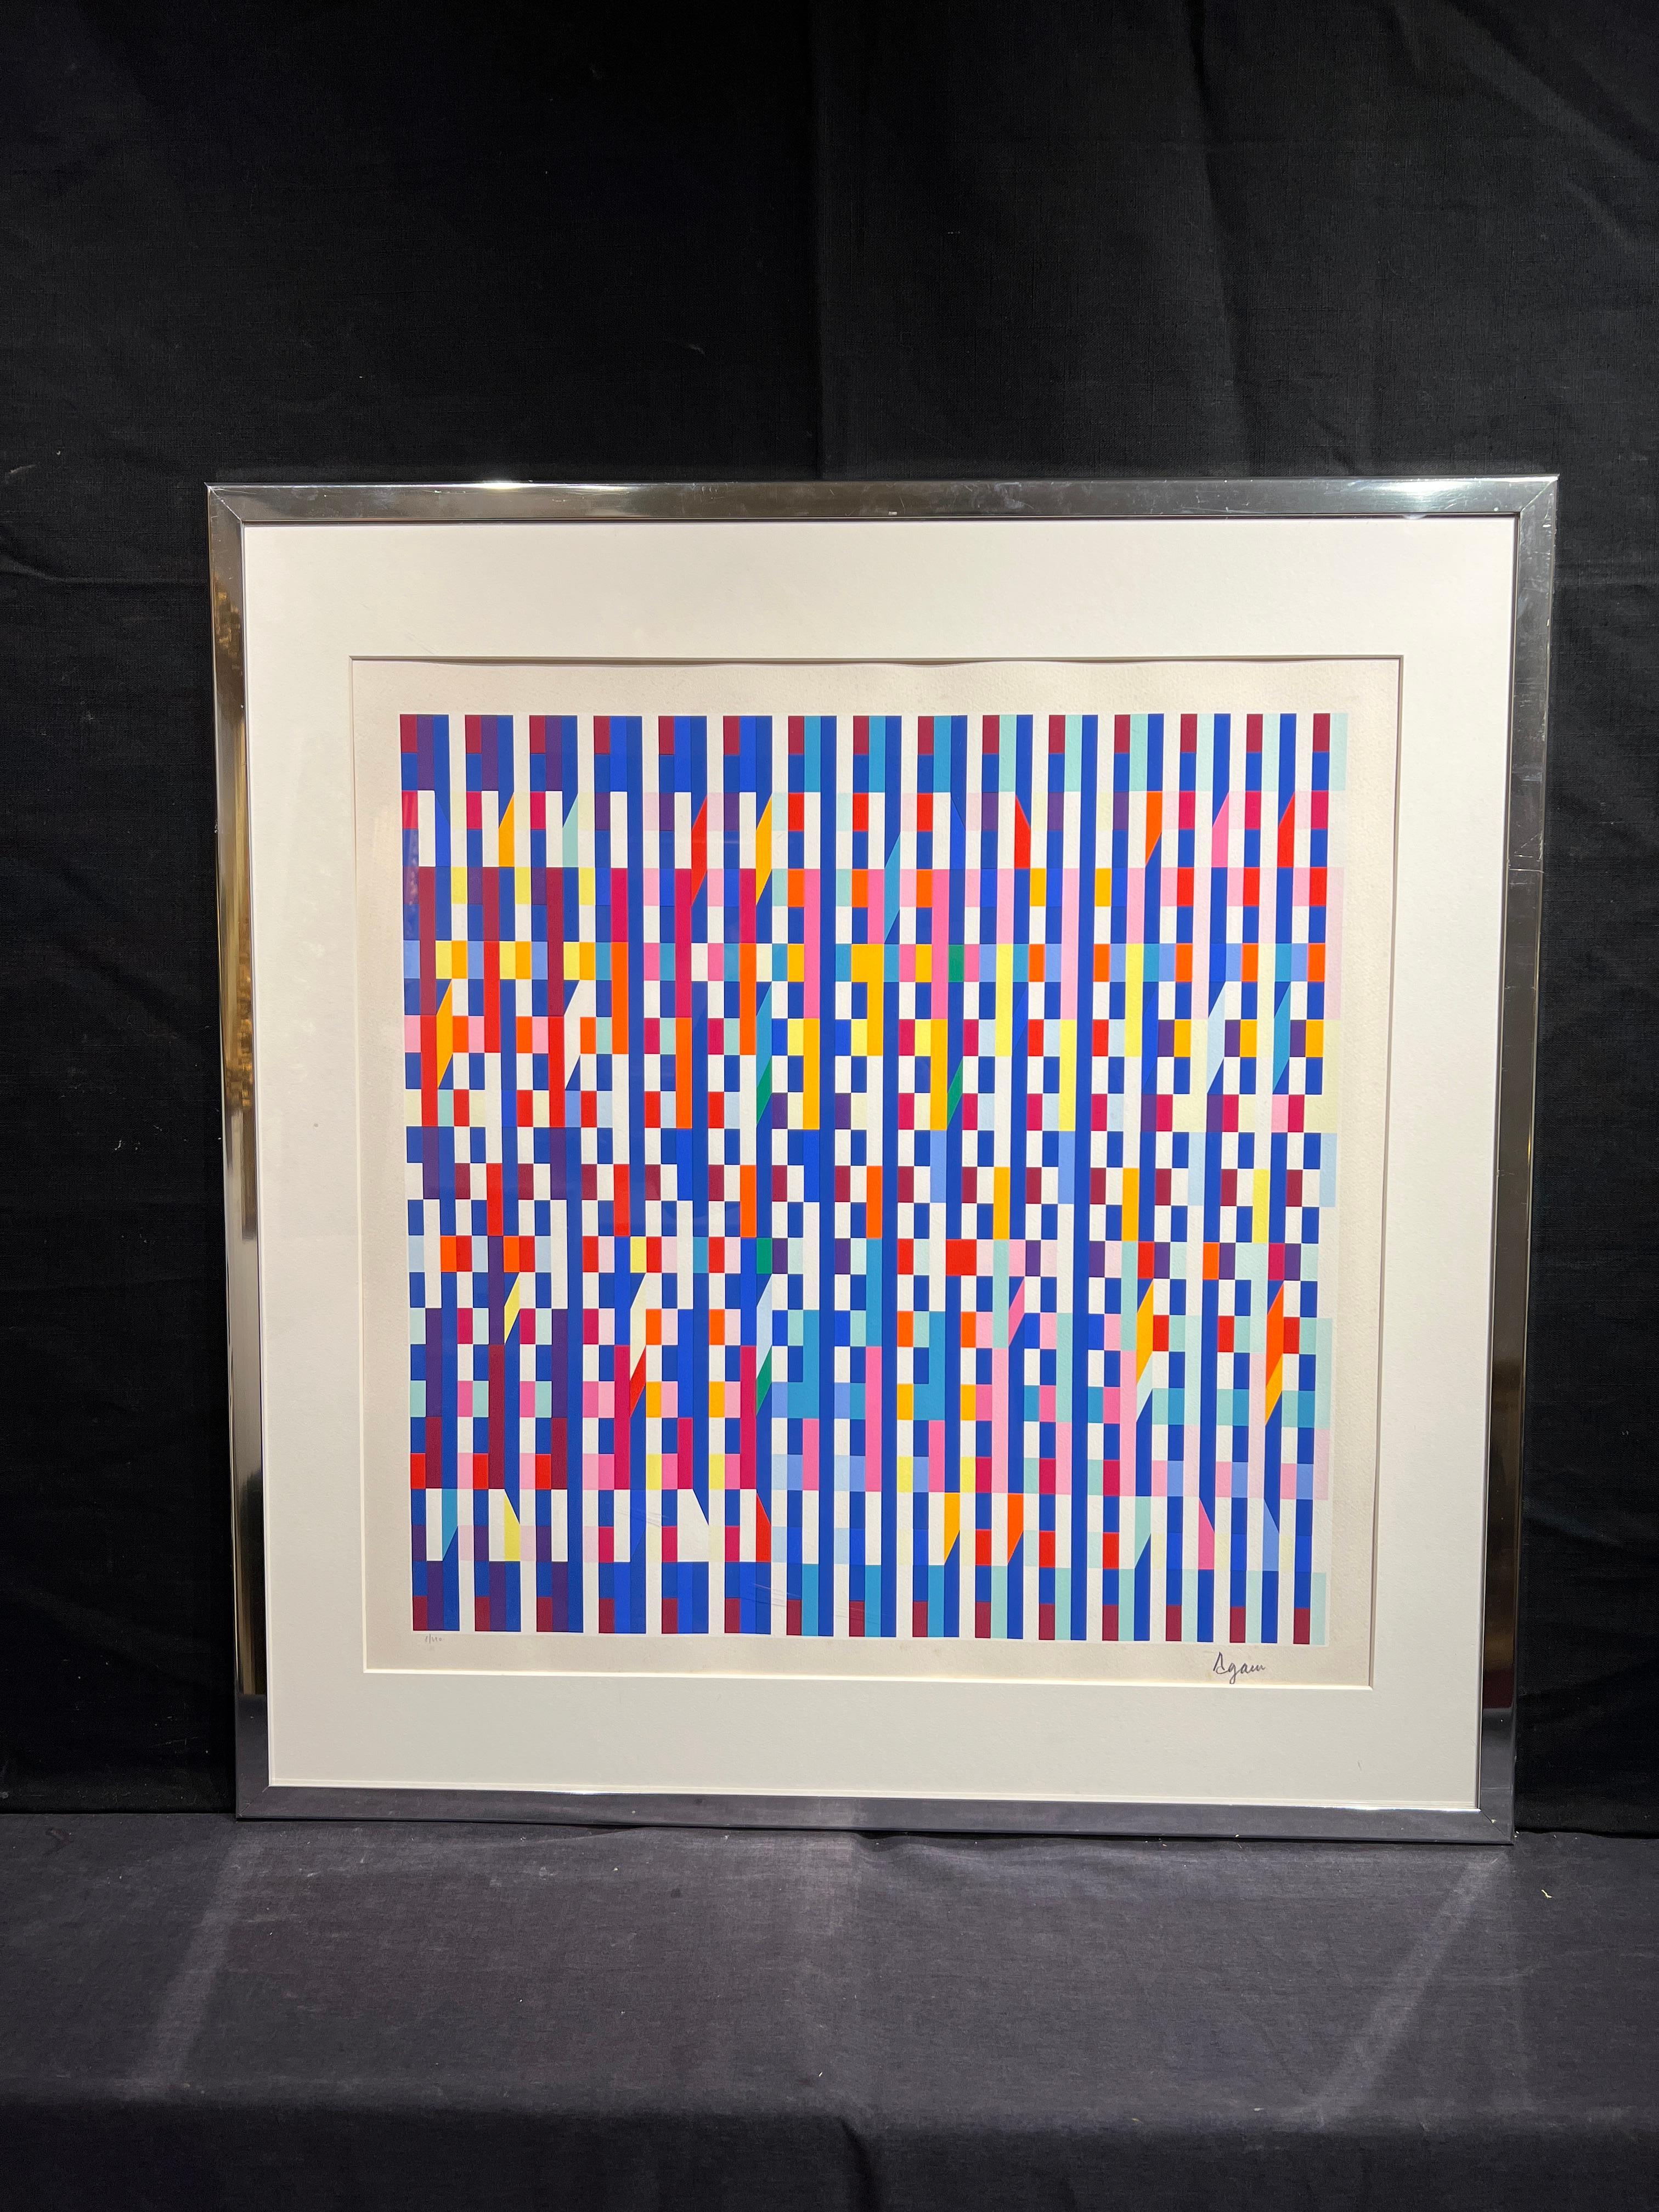 Blue Rings (Abstract Composition) - Print by Yaacov Agam